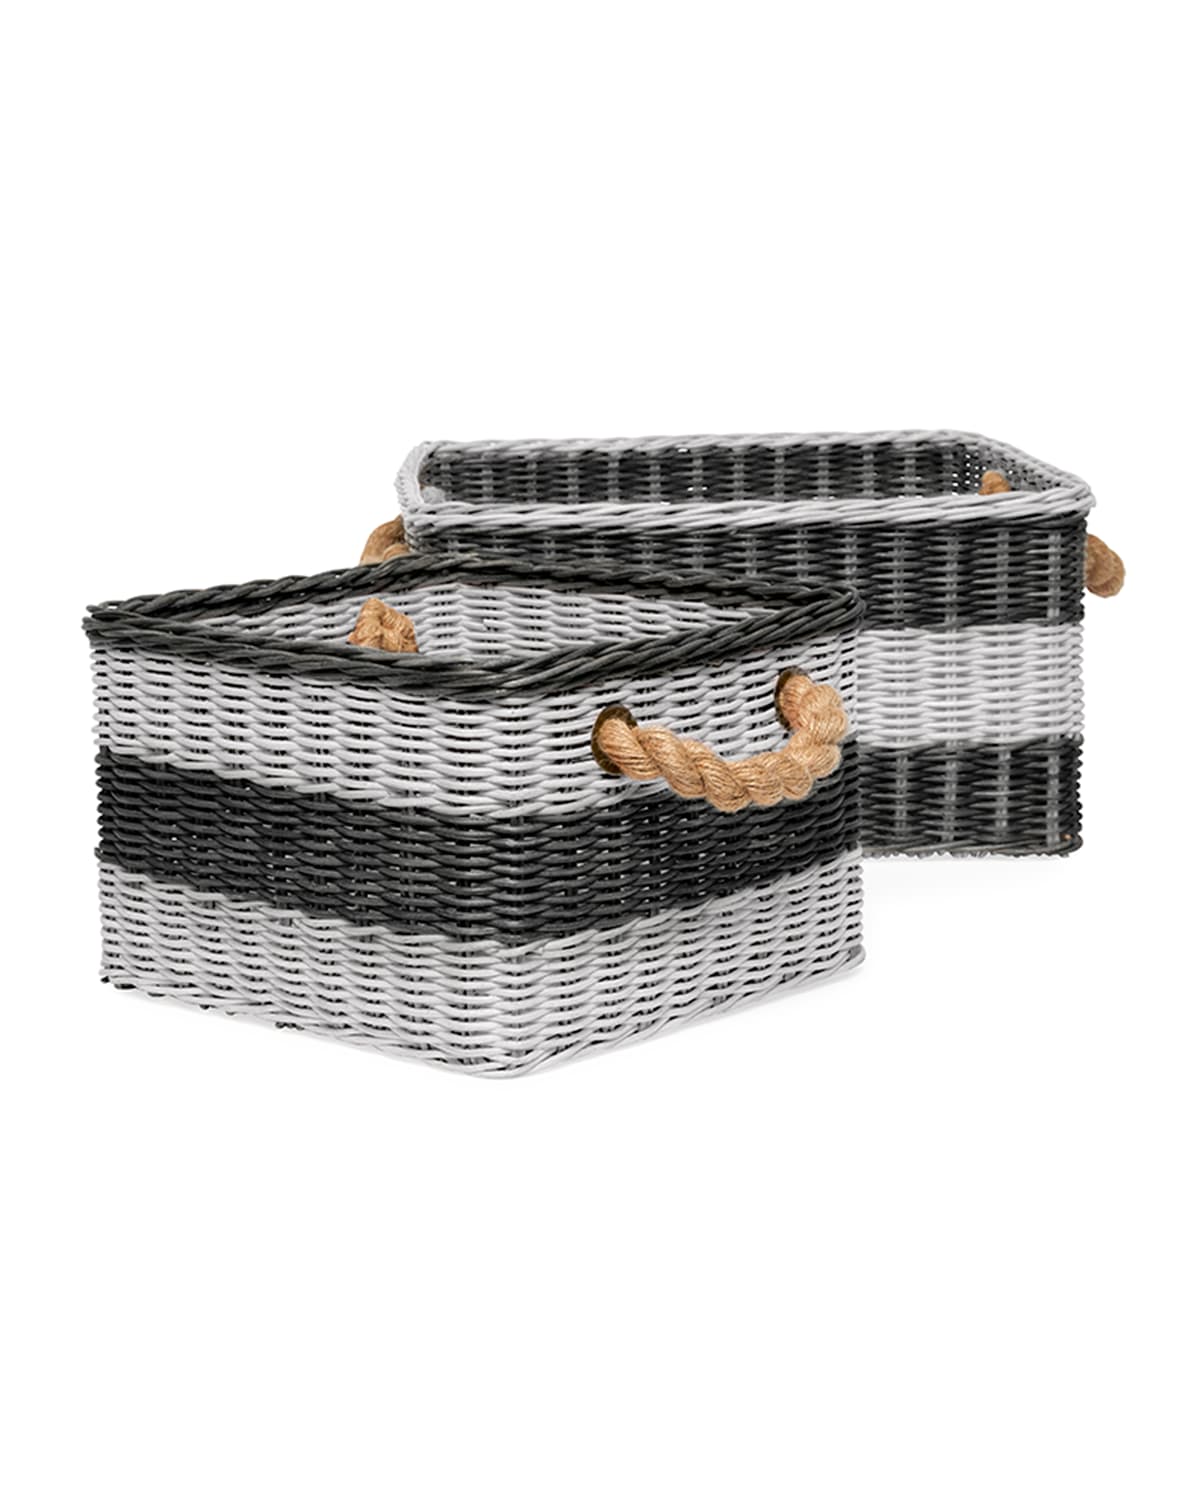 Pigeon & Poodle Nantucket Nested Storage Baskets, Set Of Two In Grey/white